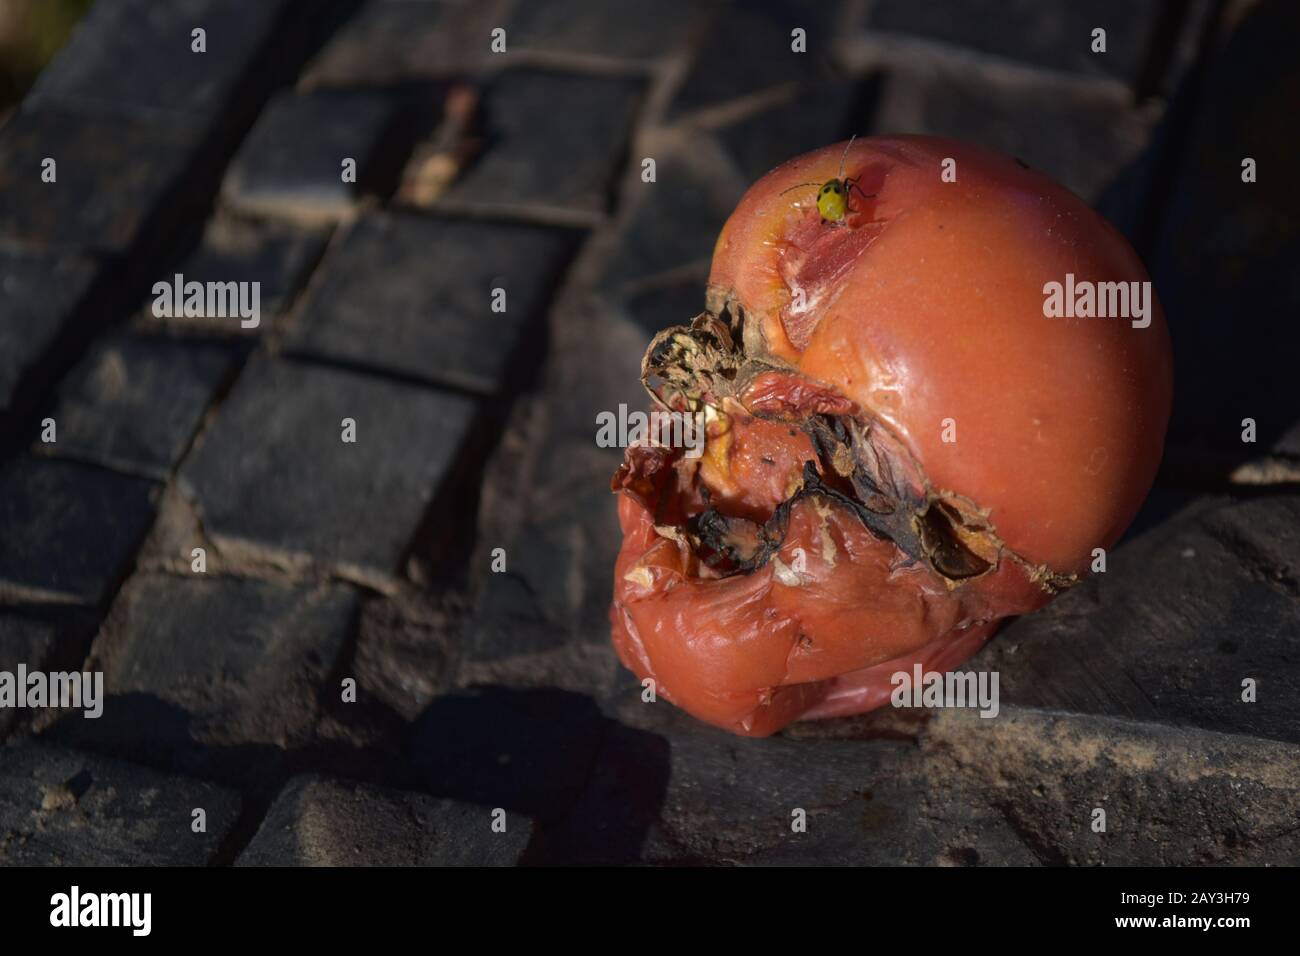 Close-up of rotten tomato with ladybug on top Stock Photo